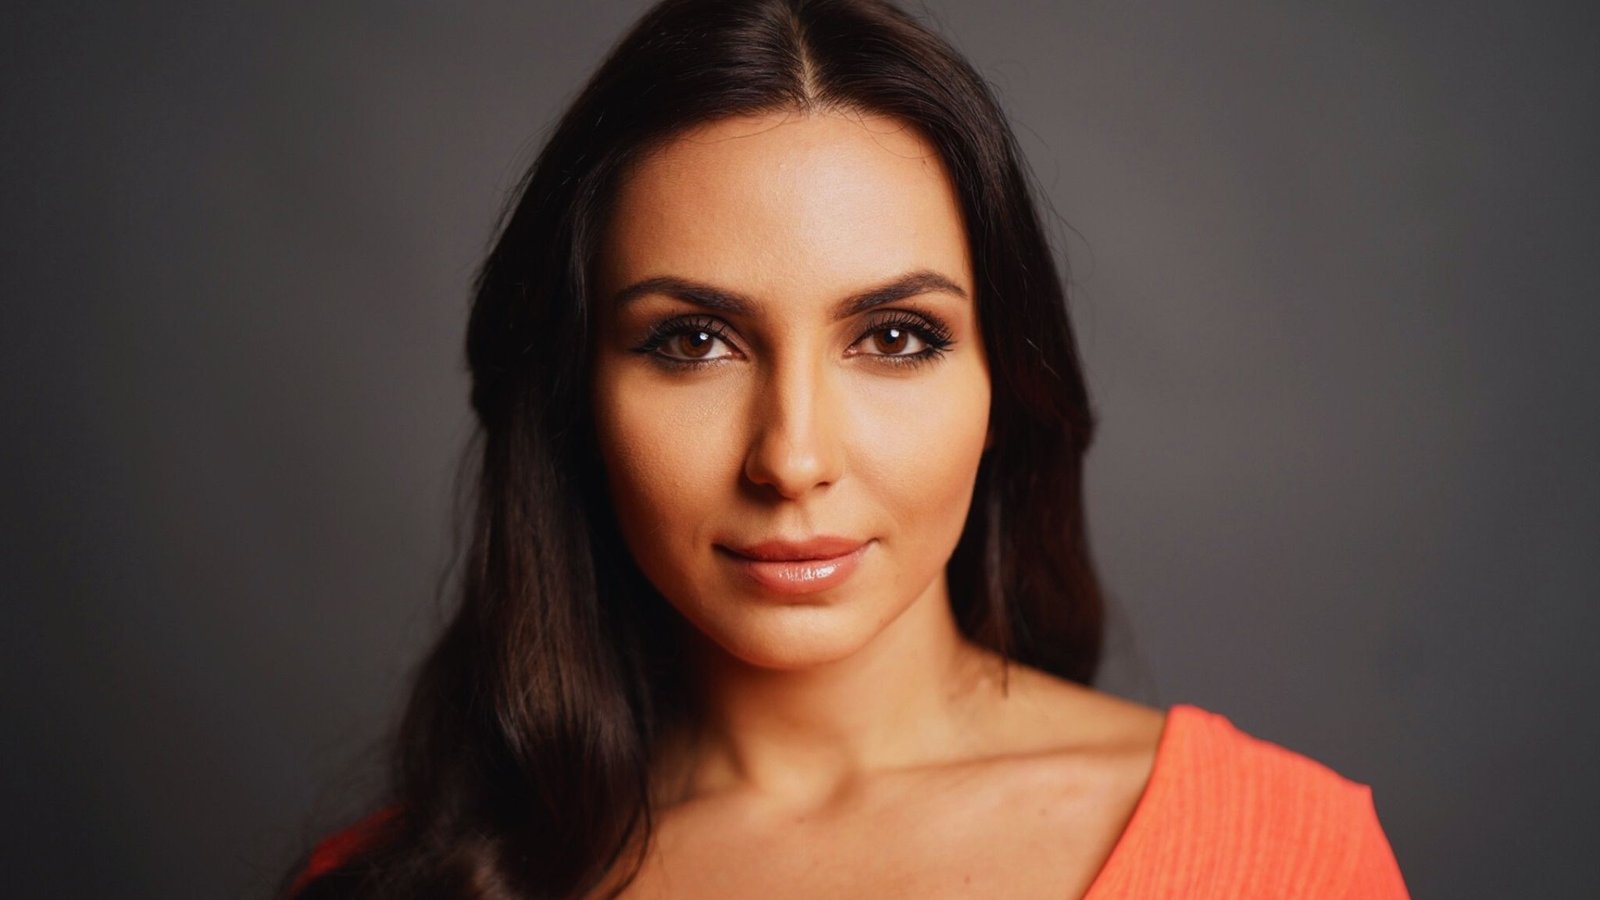 Bulgarian journalist, model, and author, excelling in storytelling through her insightful journalism, striking presence as a model, and captivating written works.